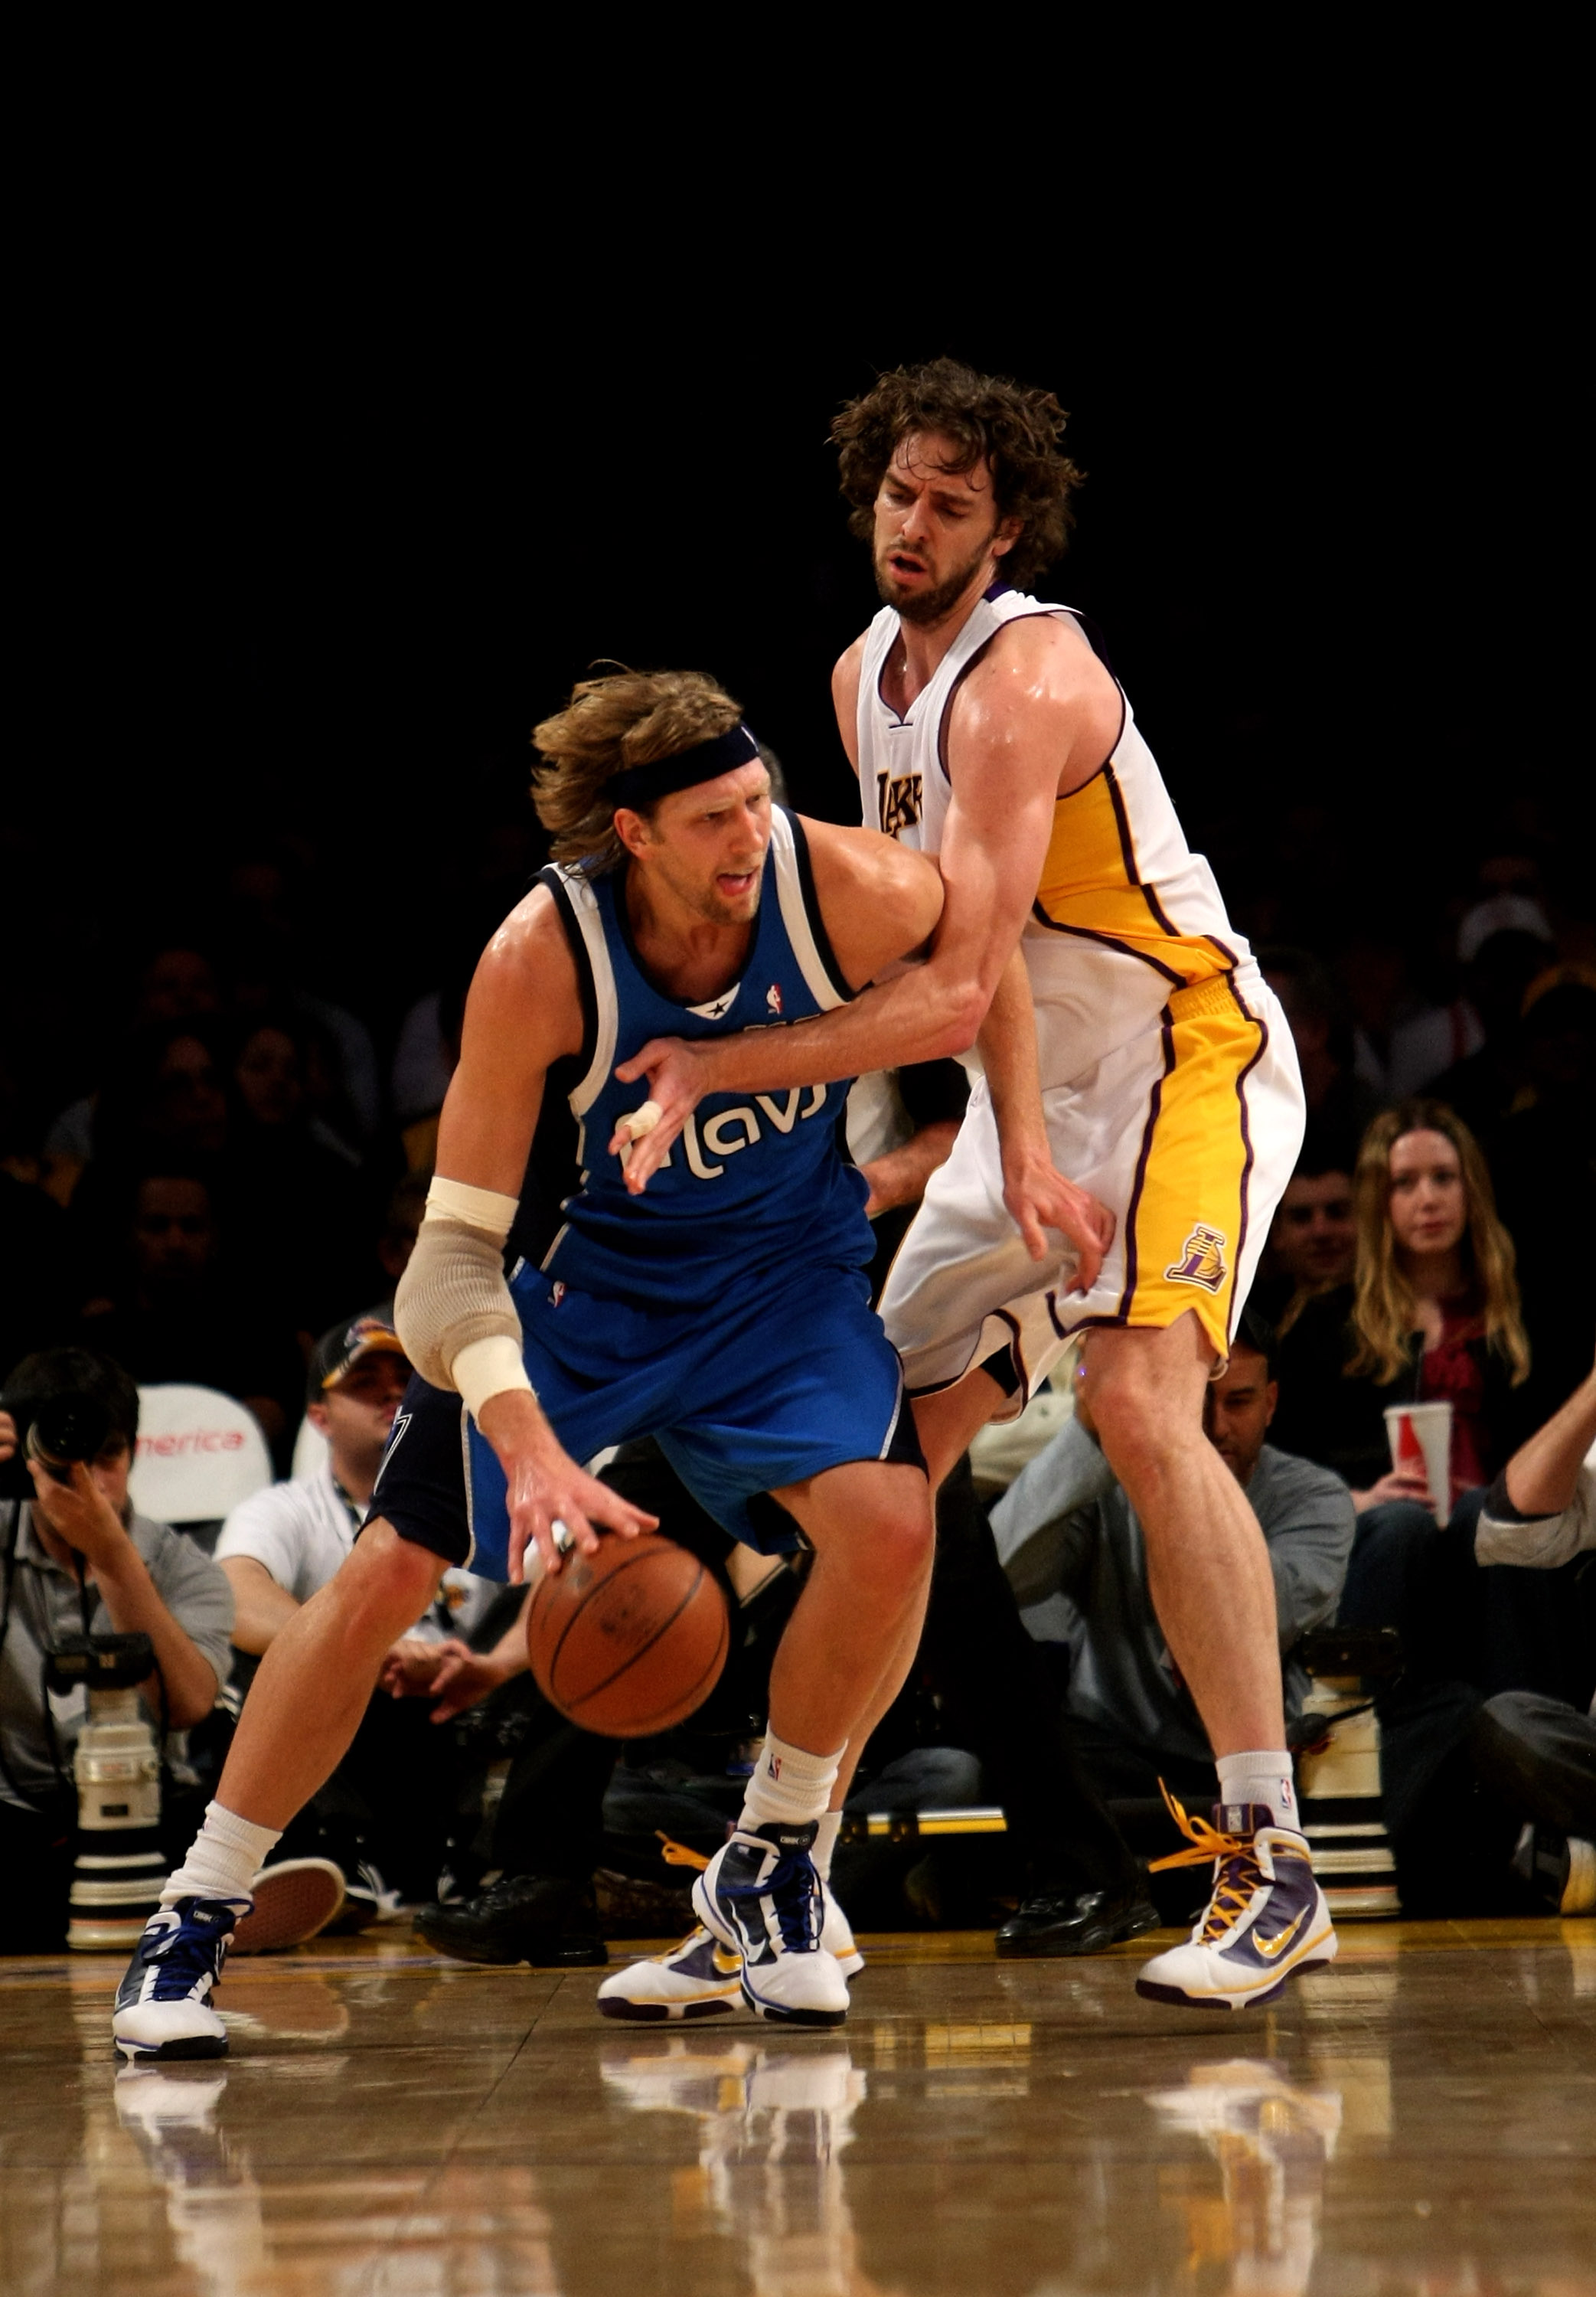 LOS ANGELES, CA - JANUARY 03: Dirk Nowitzki #41 of the Dallas Mavericks driveas against Pau Gasol #16 of the Los Angeles Lakers on January 3, 2010 at Staples Center in Los Angeles, California. NOTE TO USER: User expressly acknowledges and agrees that, by